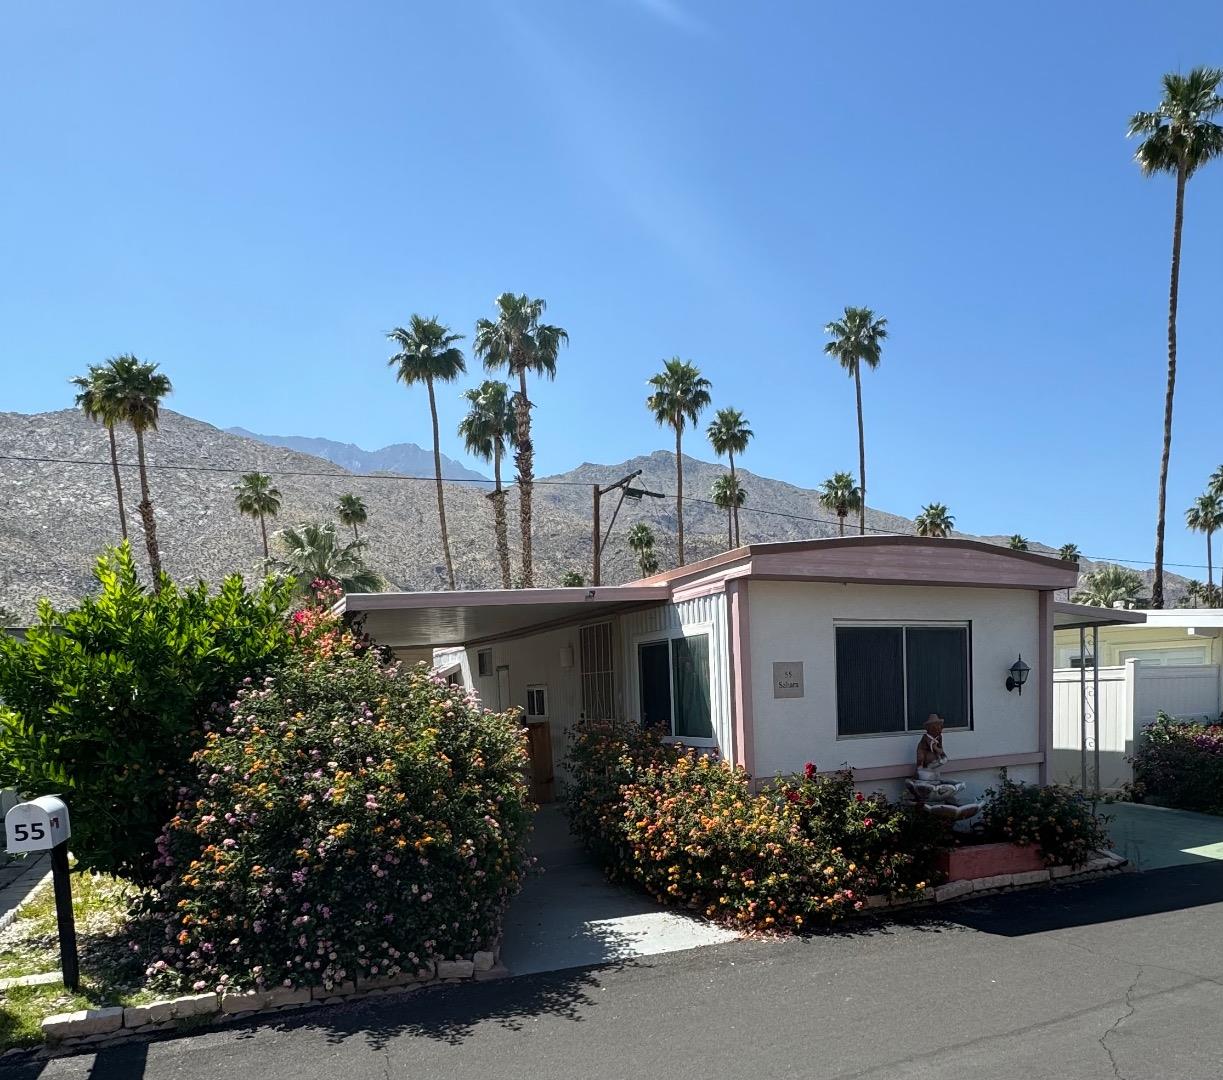 Photo of 55 Sahara St #55 in Palm Springs, CA